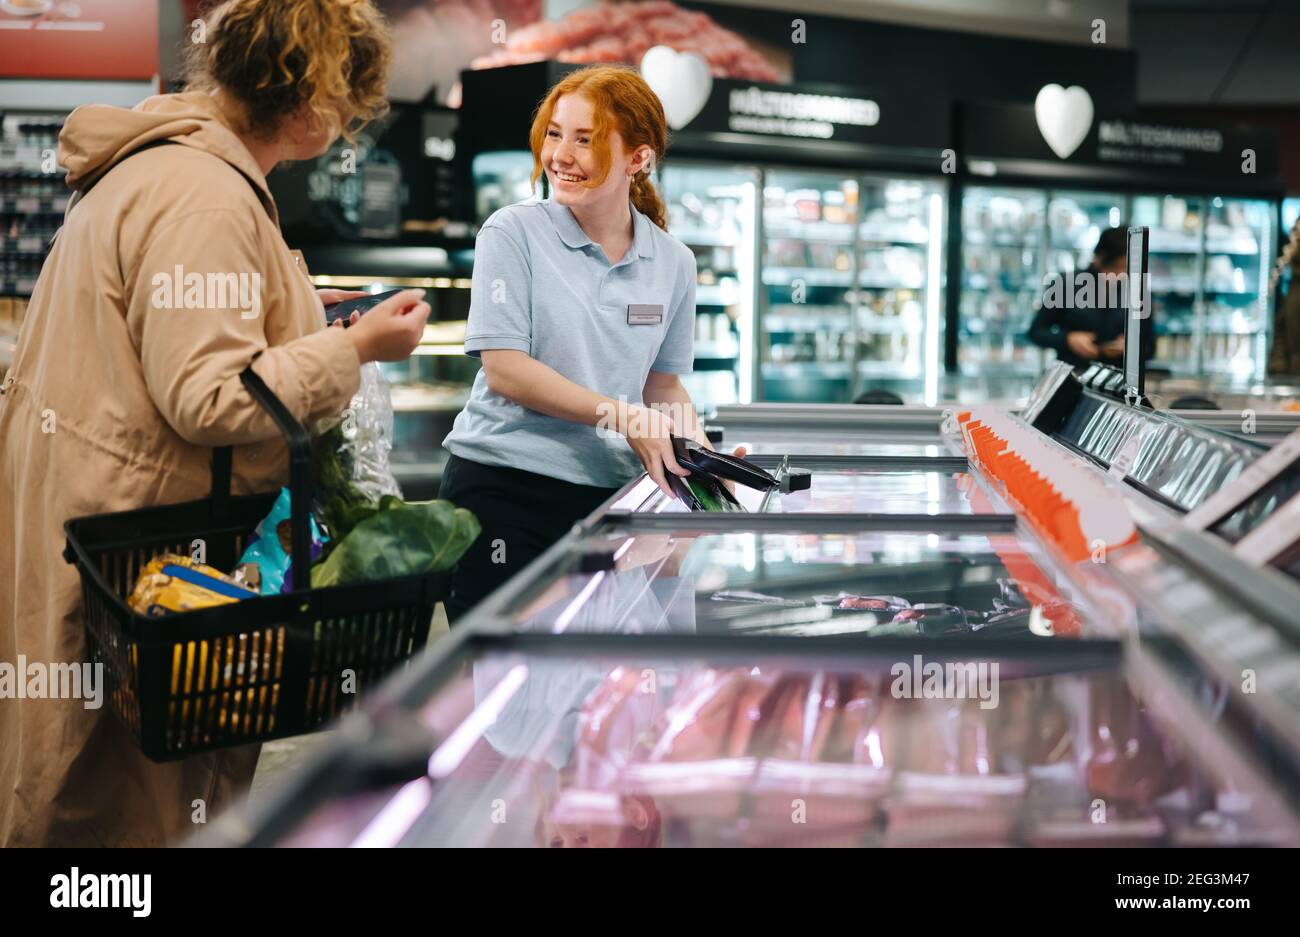 Woman working in supermarket assisting a customer. Grocery shop employee helping a female shopper. Stock Photo